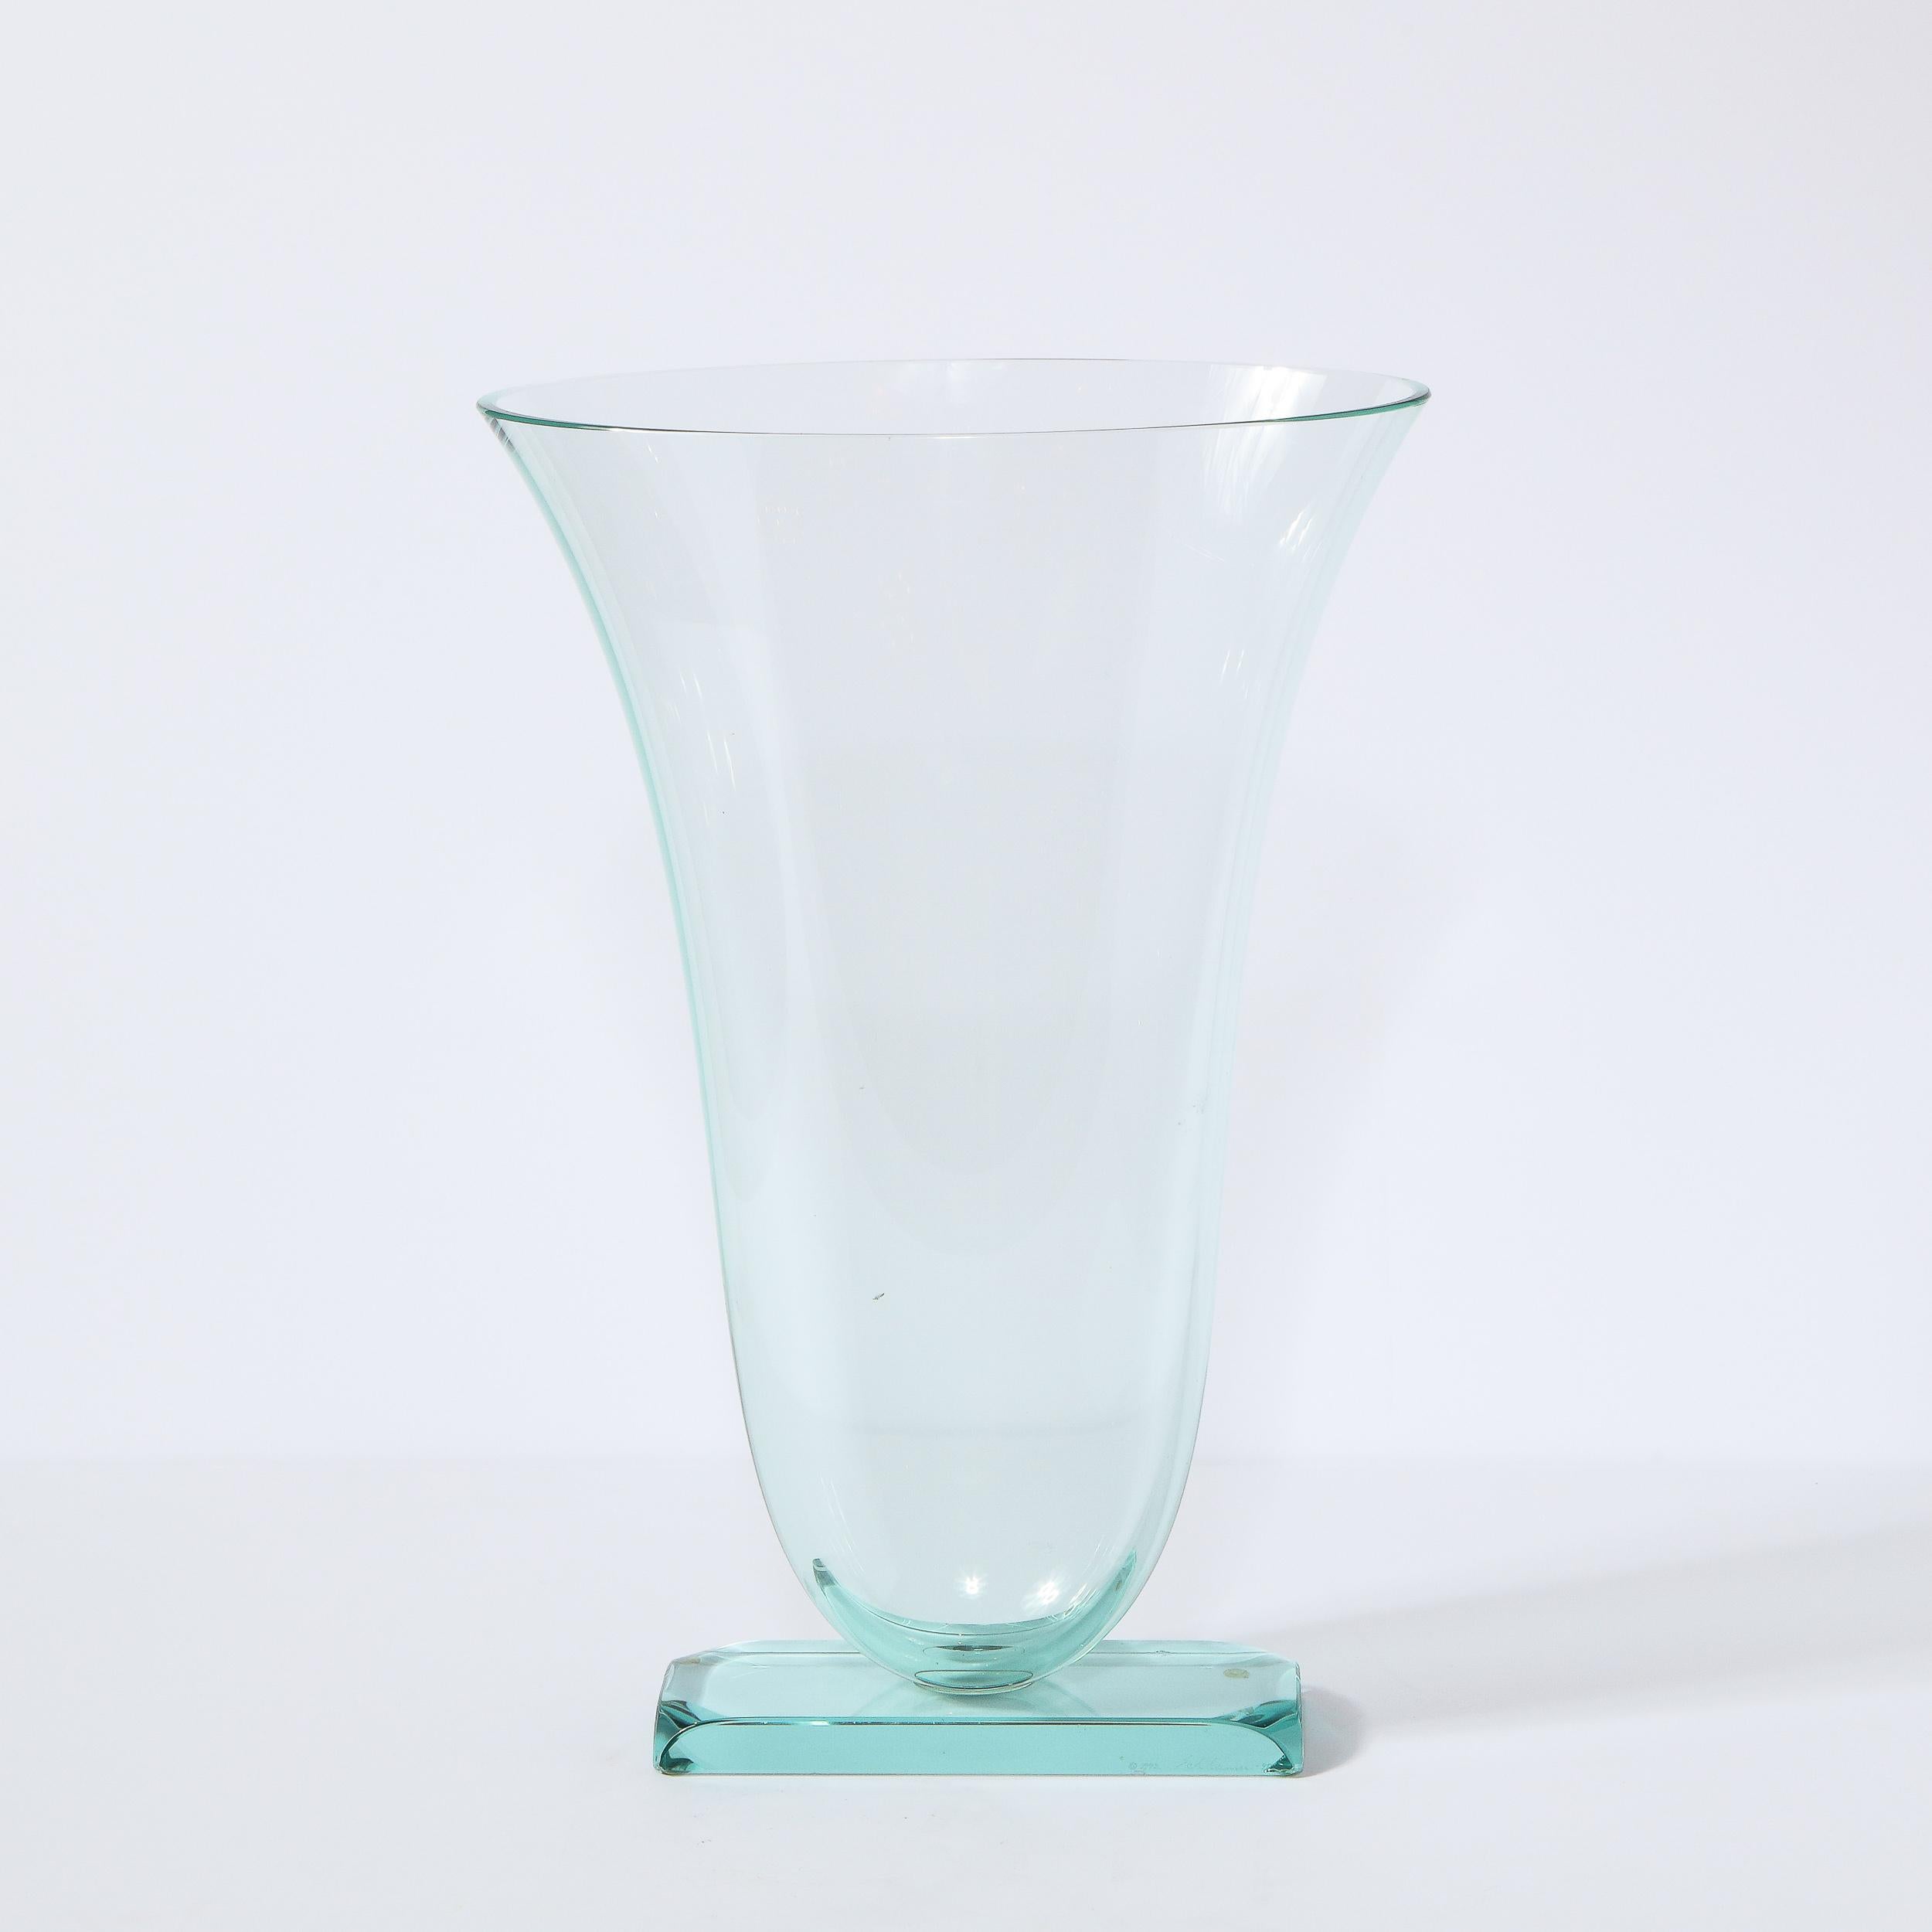 This stunning modernist sculptural vase was realized by the esteemed studio of Steven Schlanser in the United States in 1995. It features a beveled volumetric rectangular base with rounded corners from with an urn shaped body ascends with a